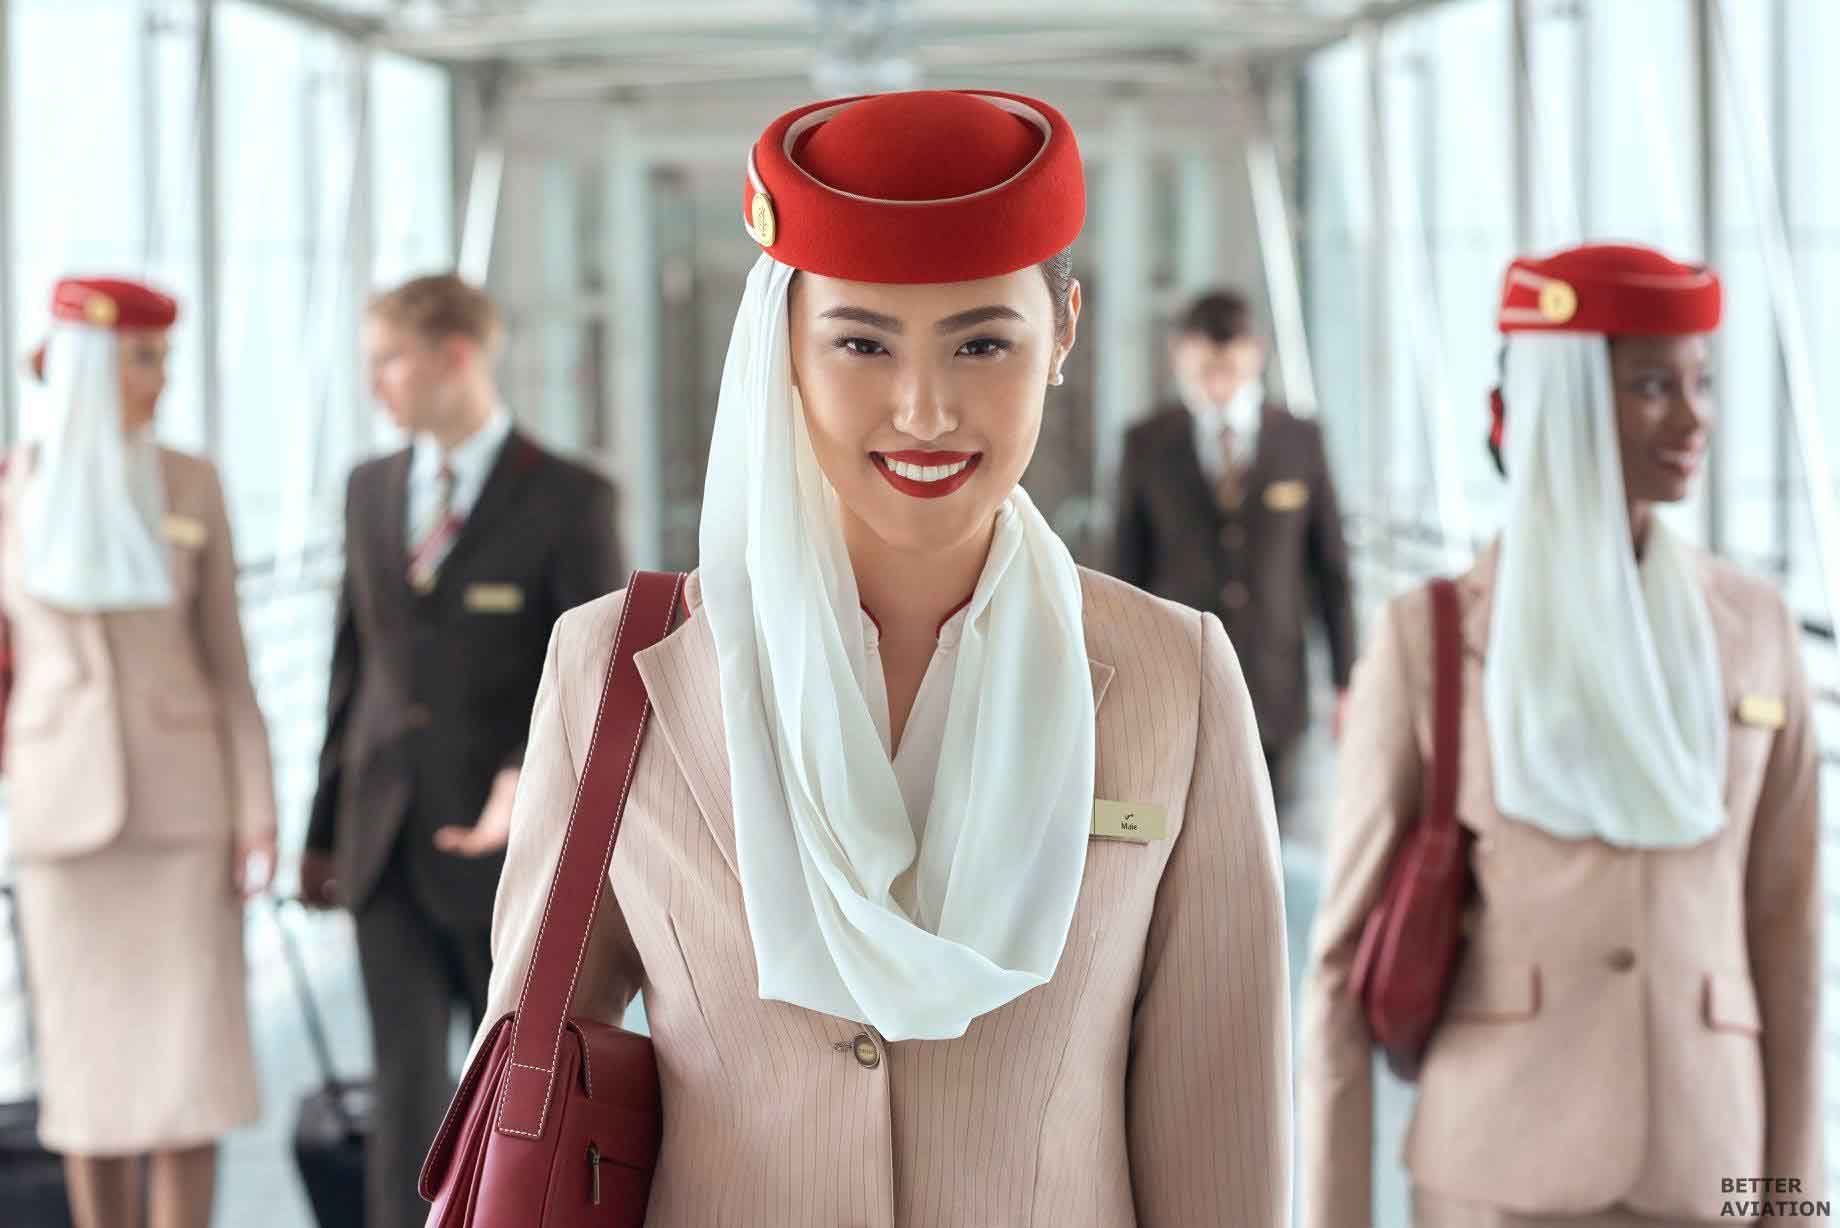 HOW TO BECOME A FLIGHT ATTENDANT